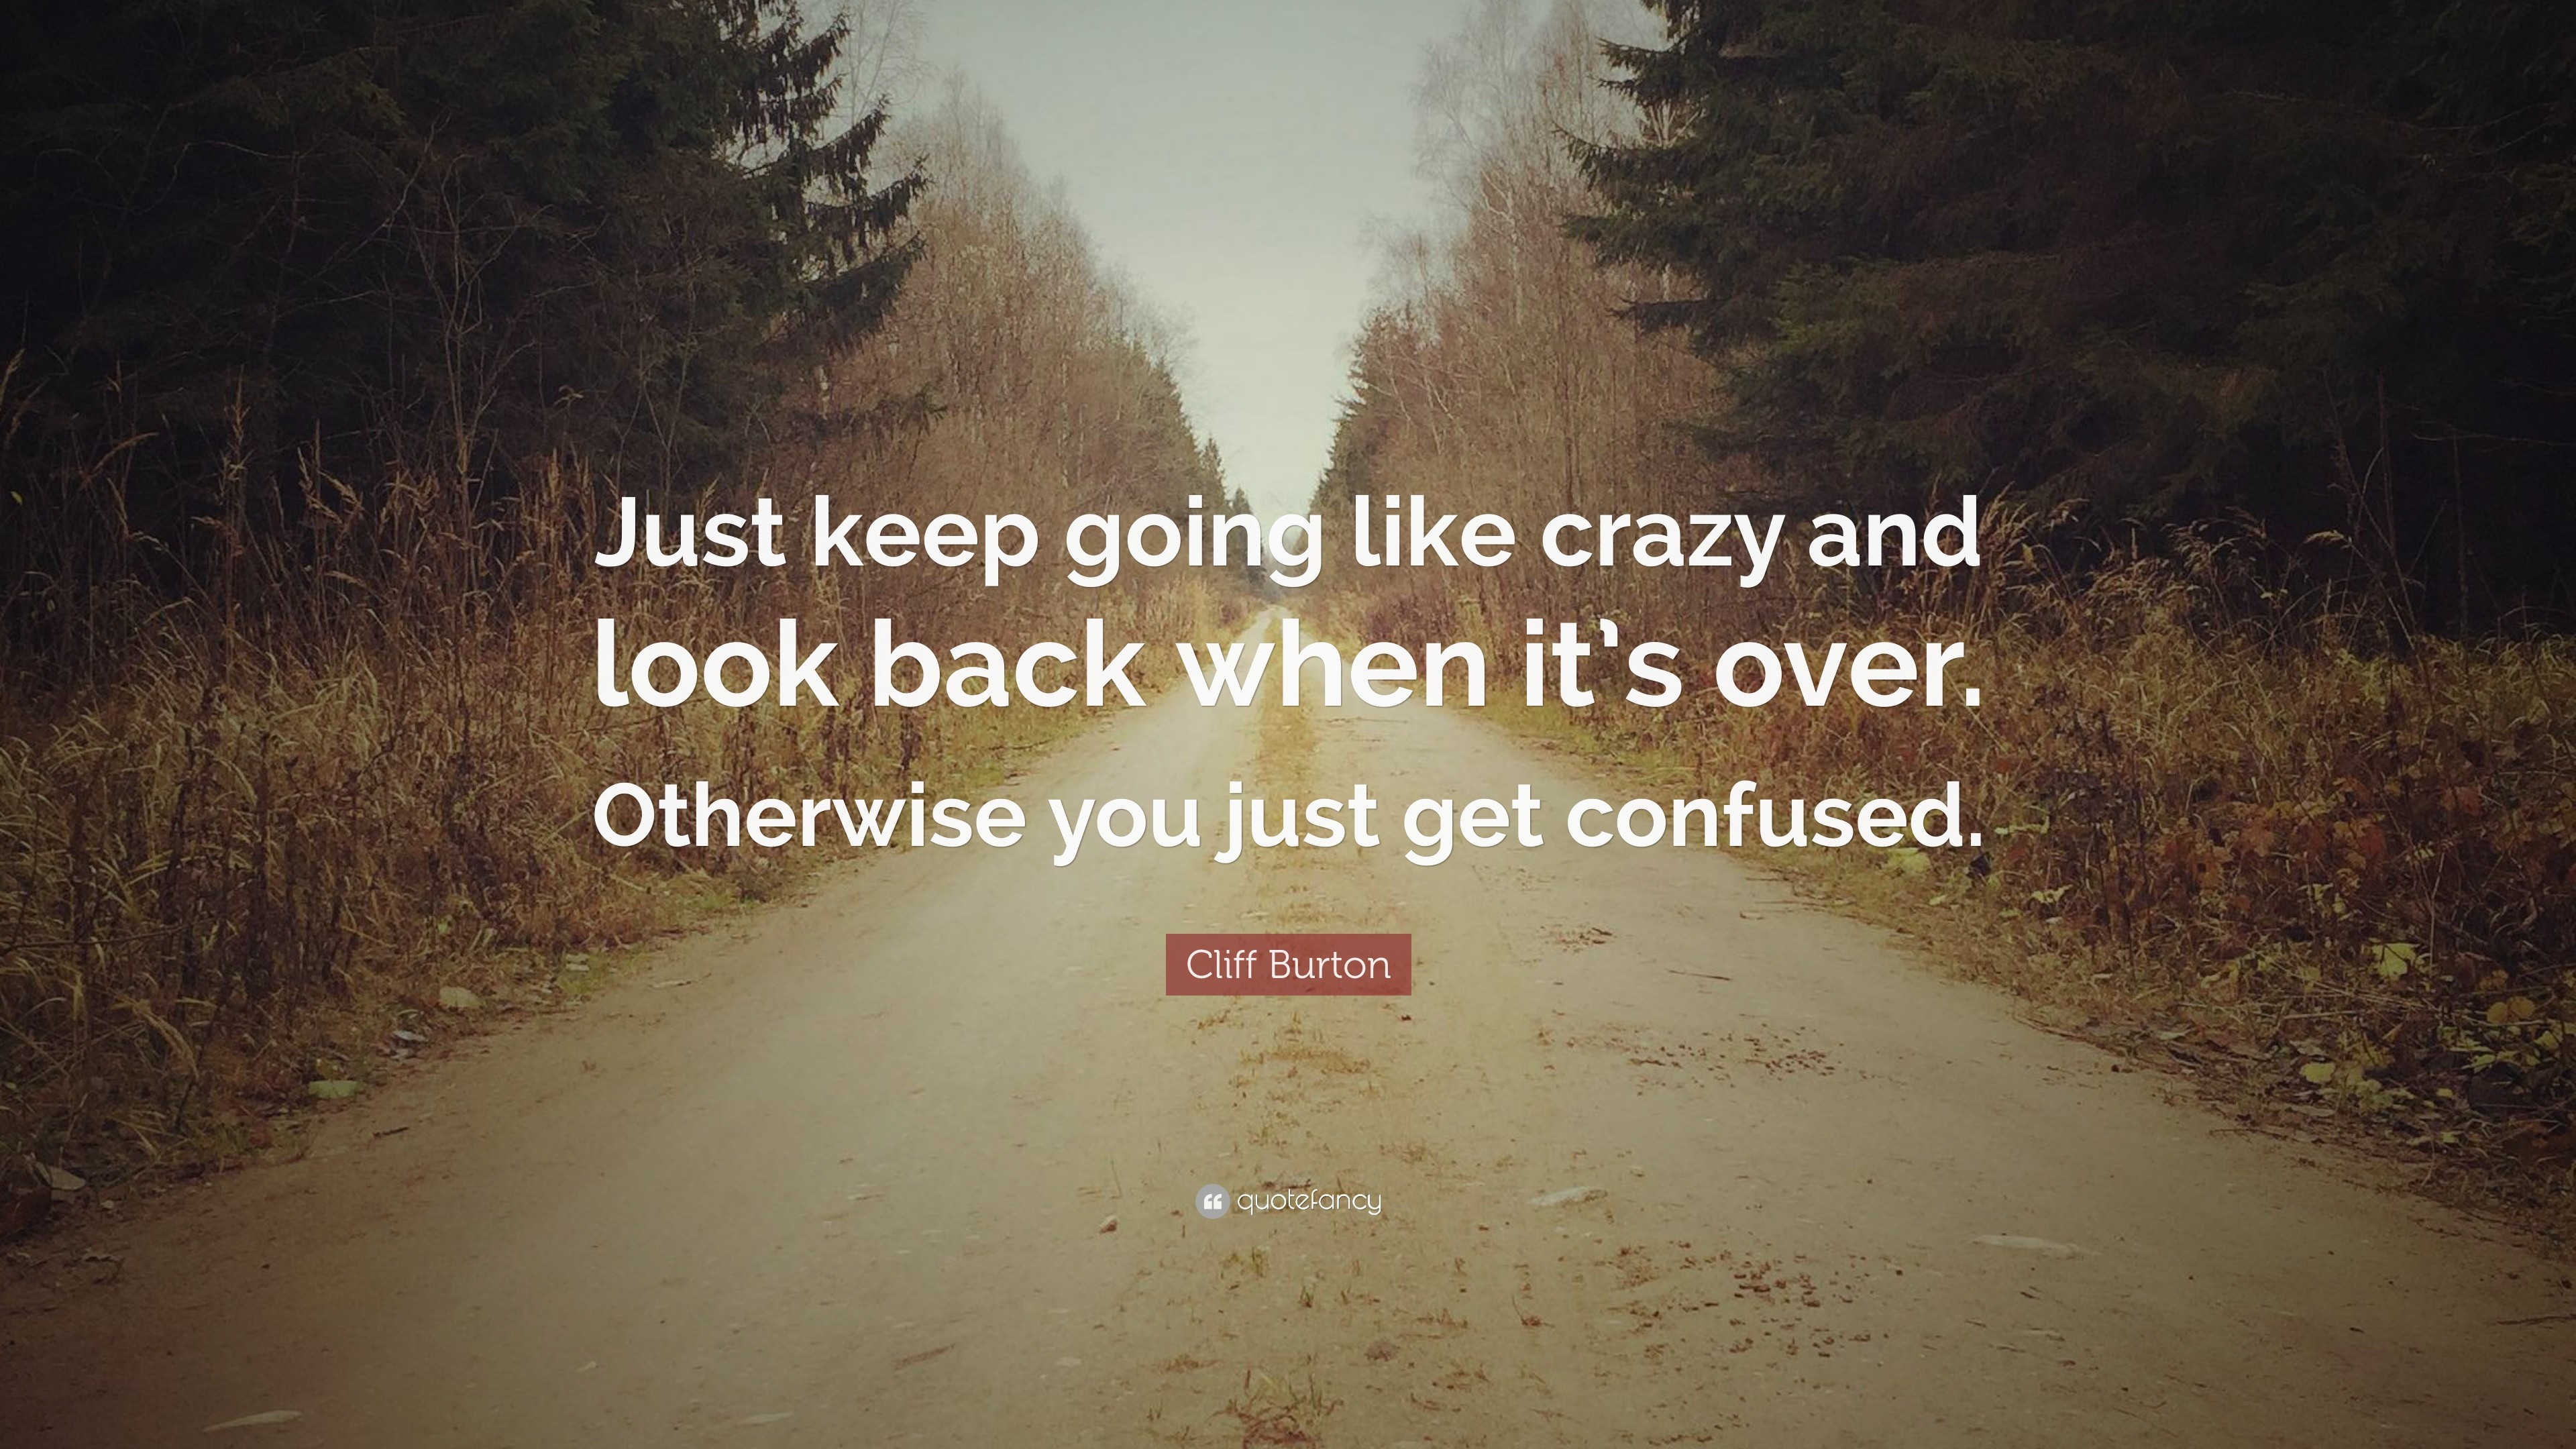 3840x2160 Cliff Burton Quote: “Just keep going like crazy and look back when it's over